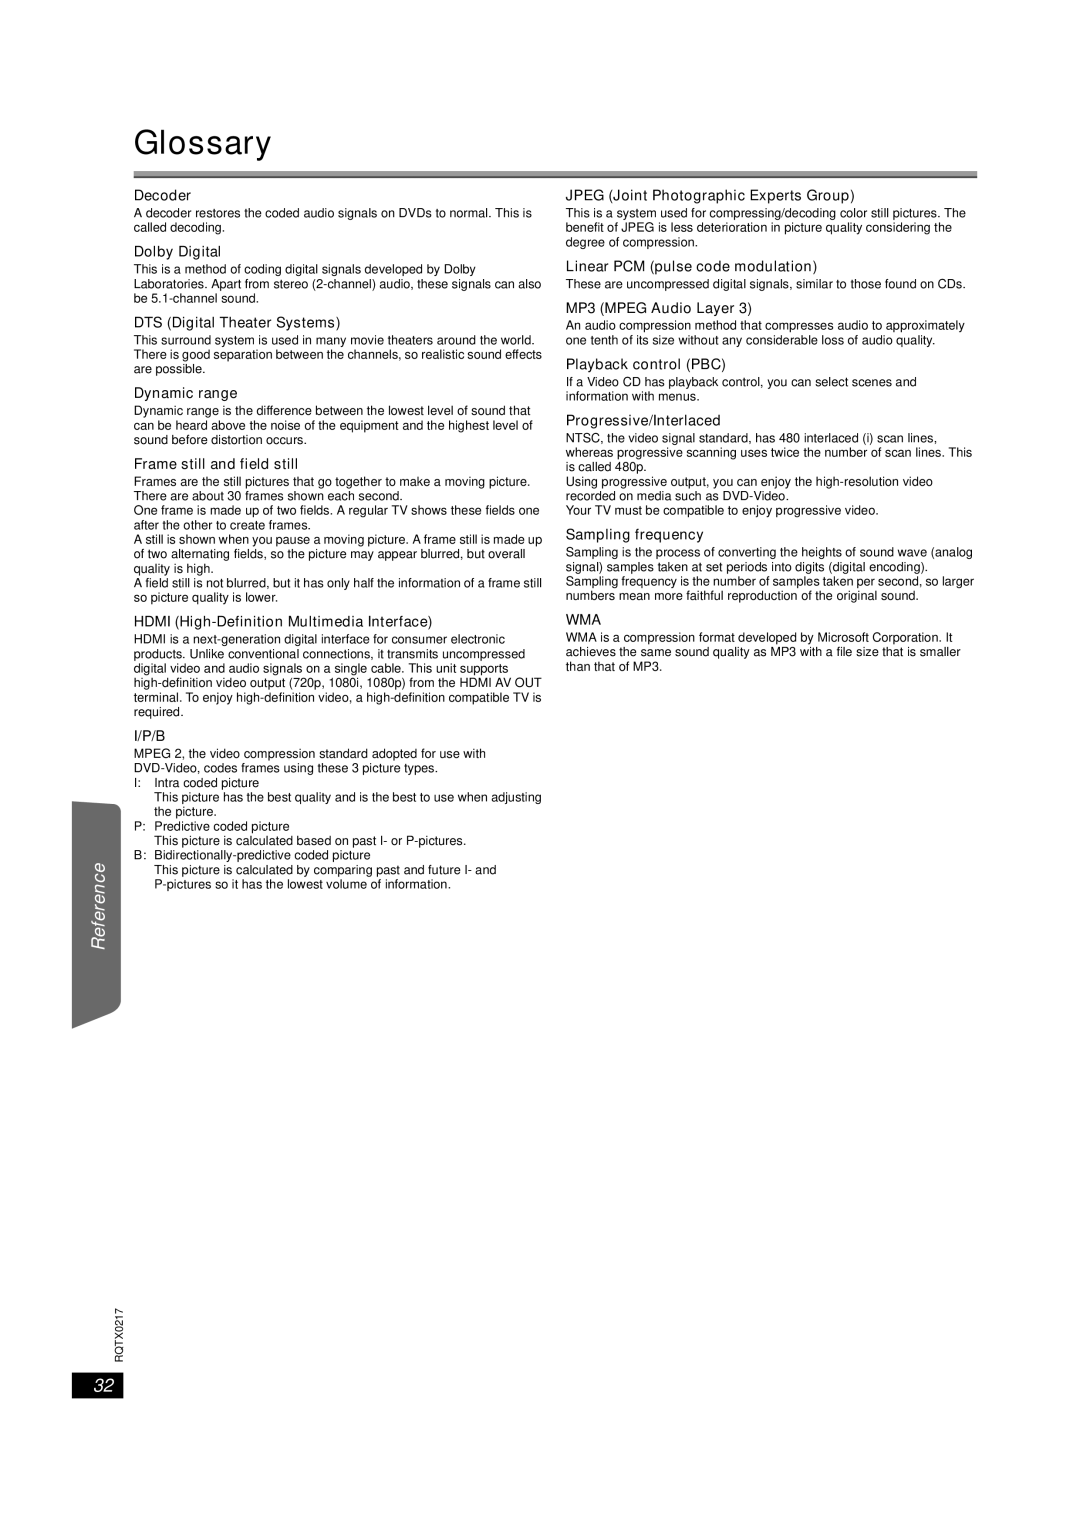 Panasonic SC-PT464 manual Glossary, Getting Started Playing Discs, Other Operations Reference 